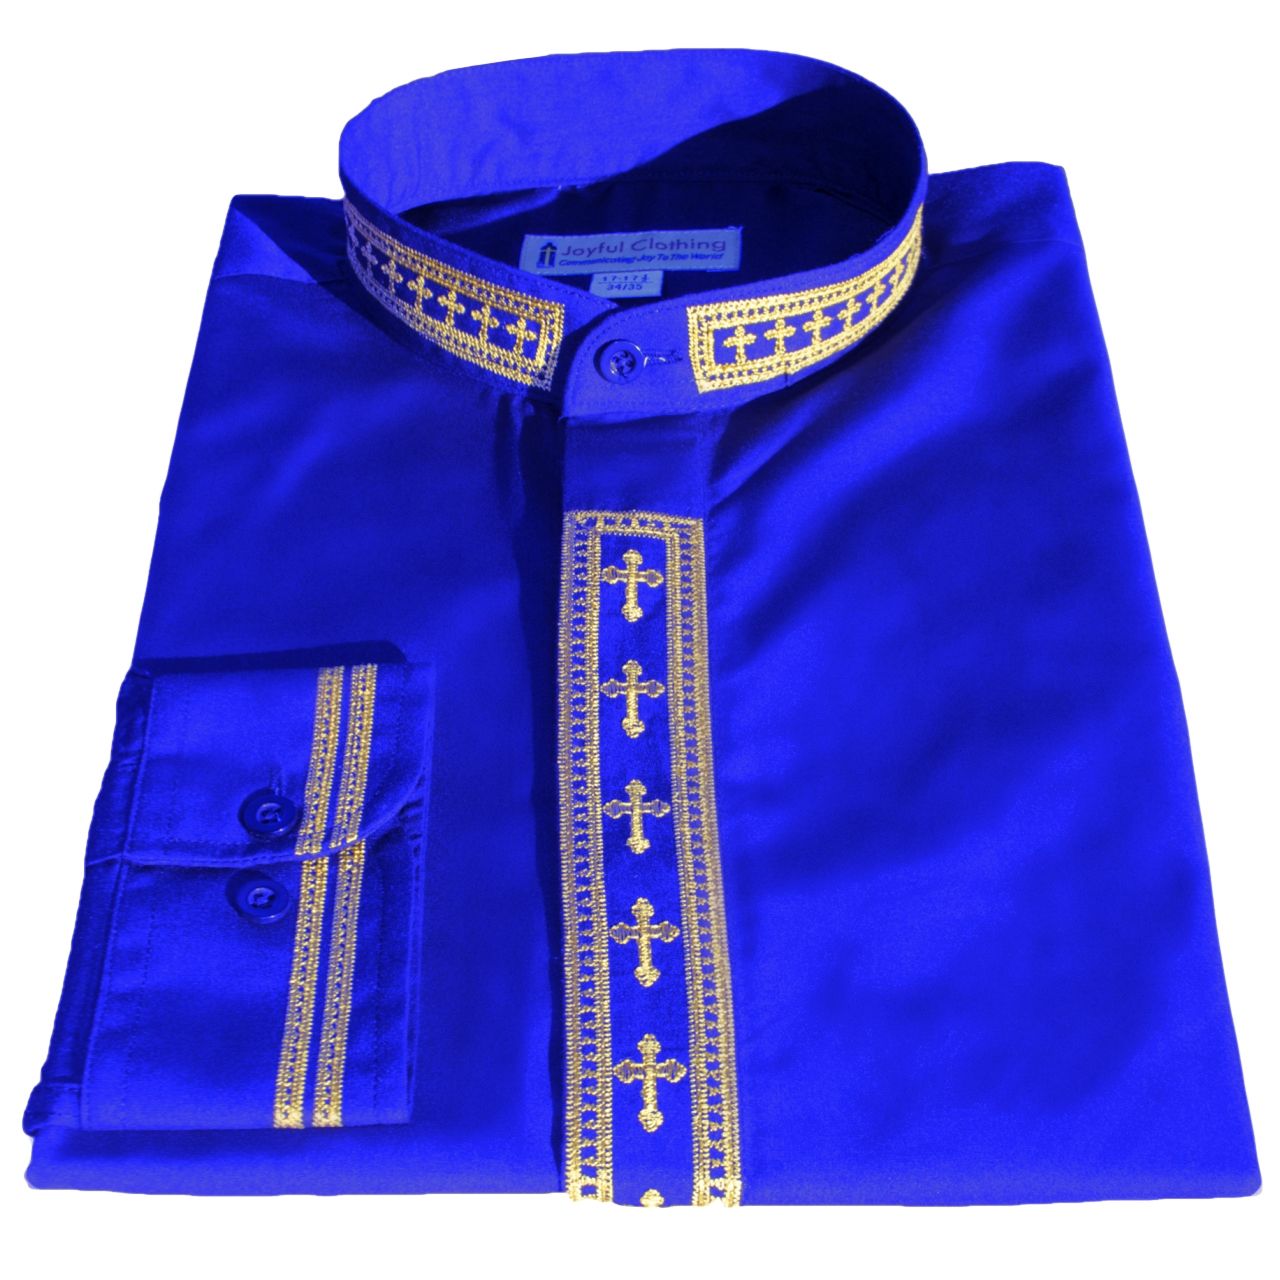 318. Men's Long-Sleeve Clergy Shirt With Fine Embroidery - Royal/Gold